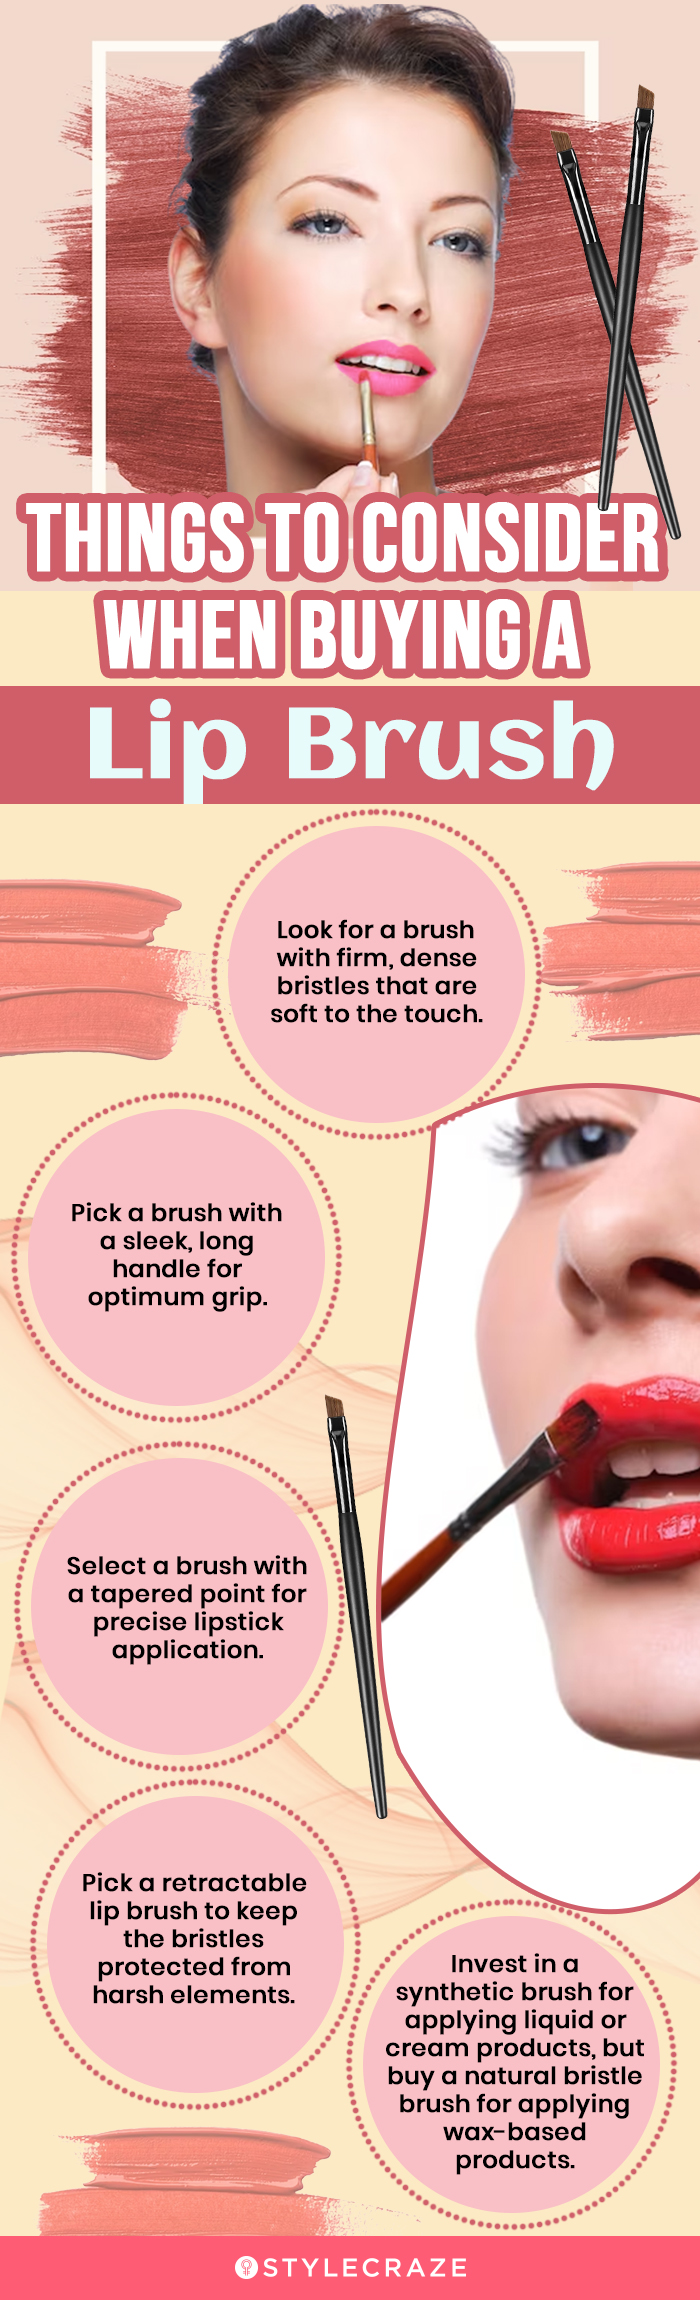 Things To Consider When Buying A Lip Brush (infographic)